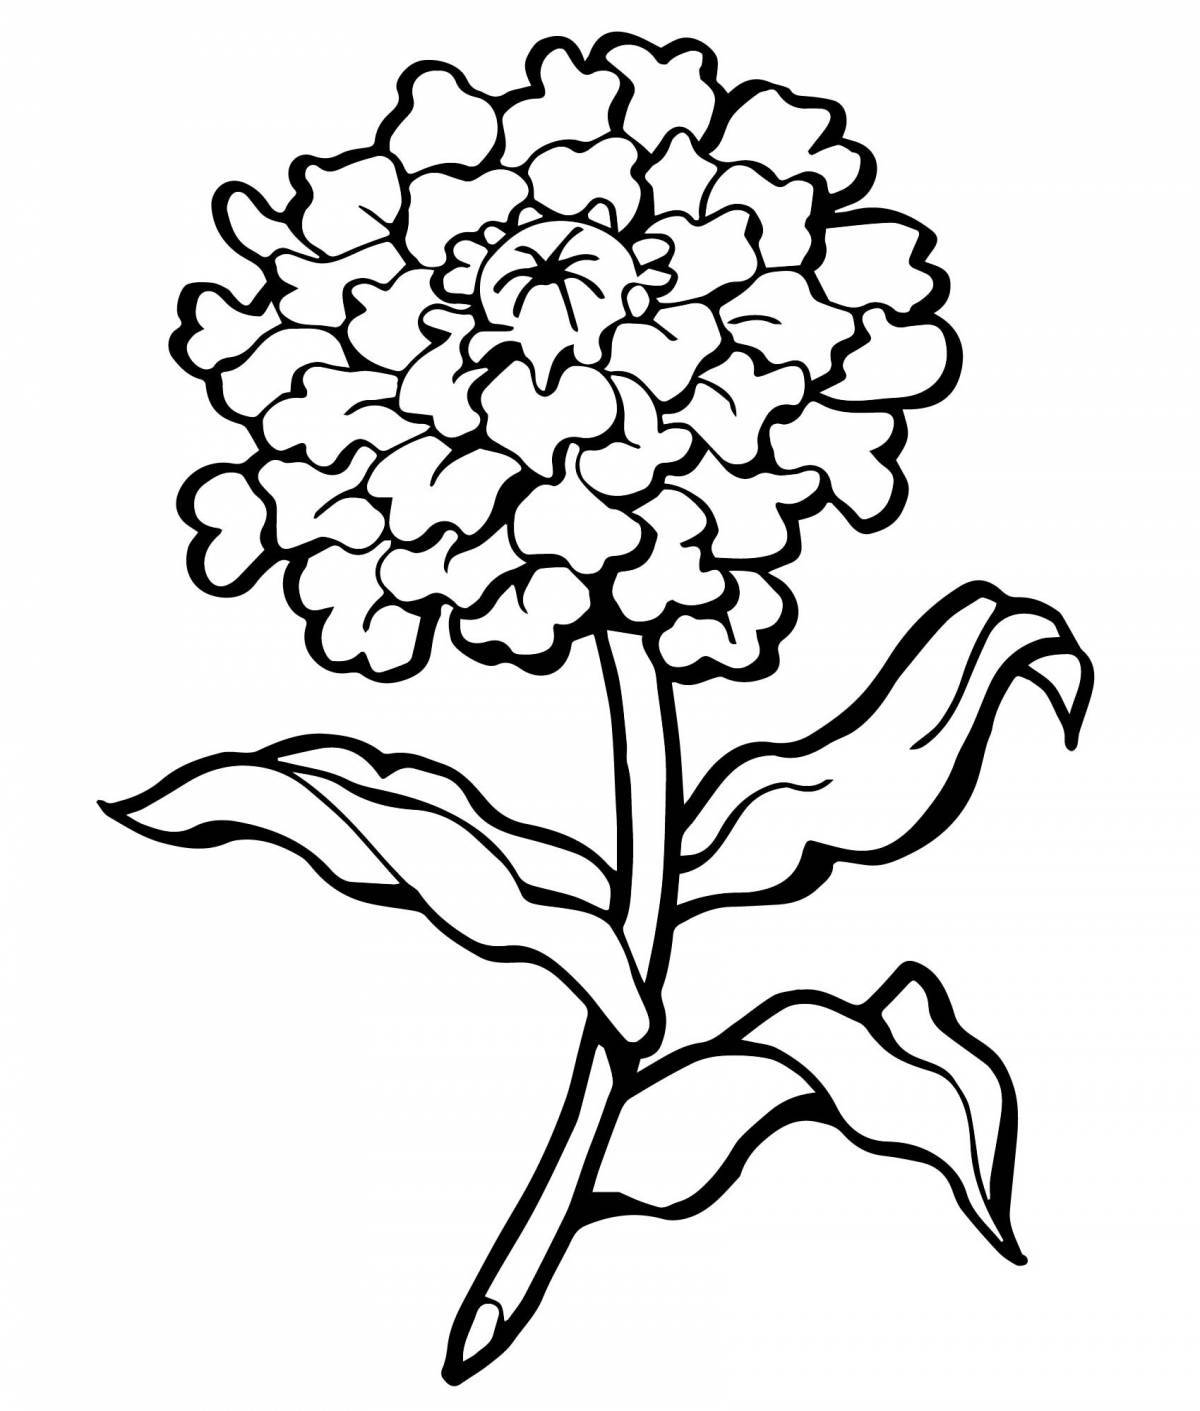 Carnation live coloring page for beginners